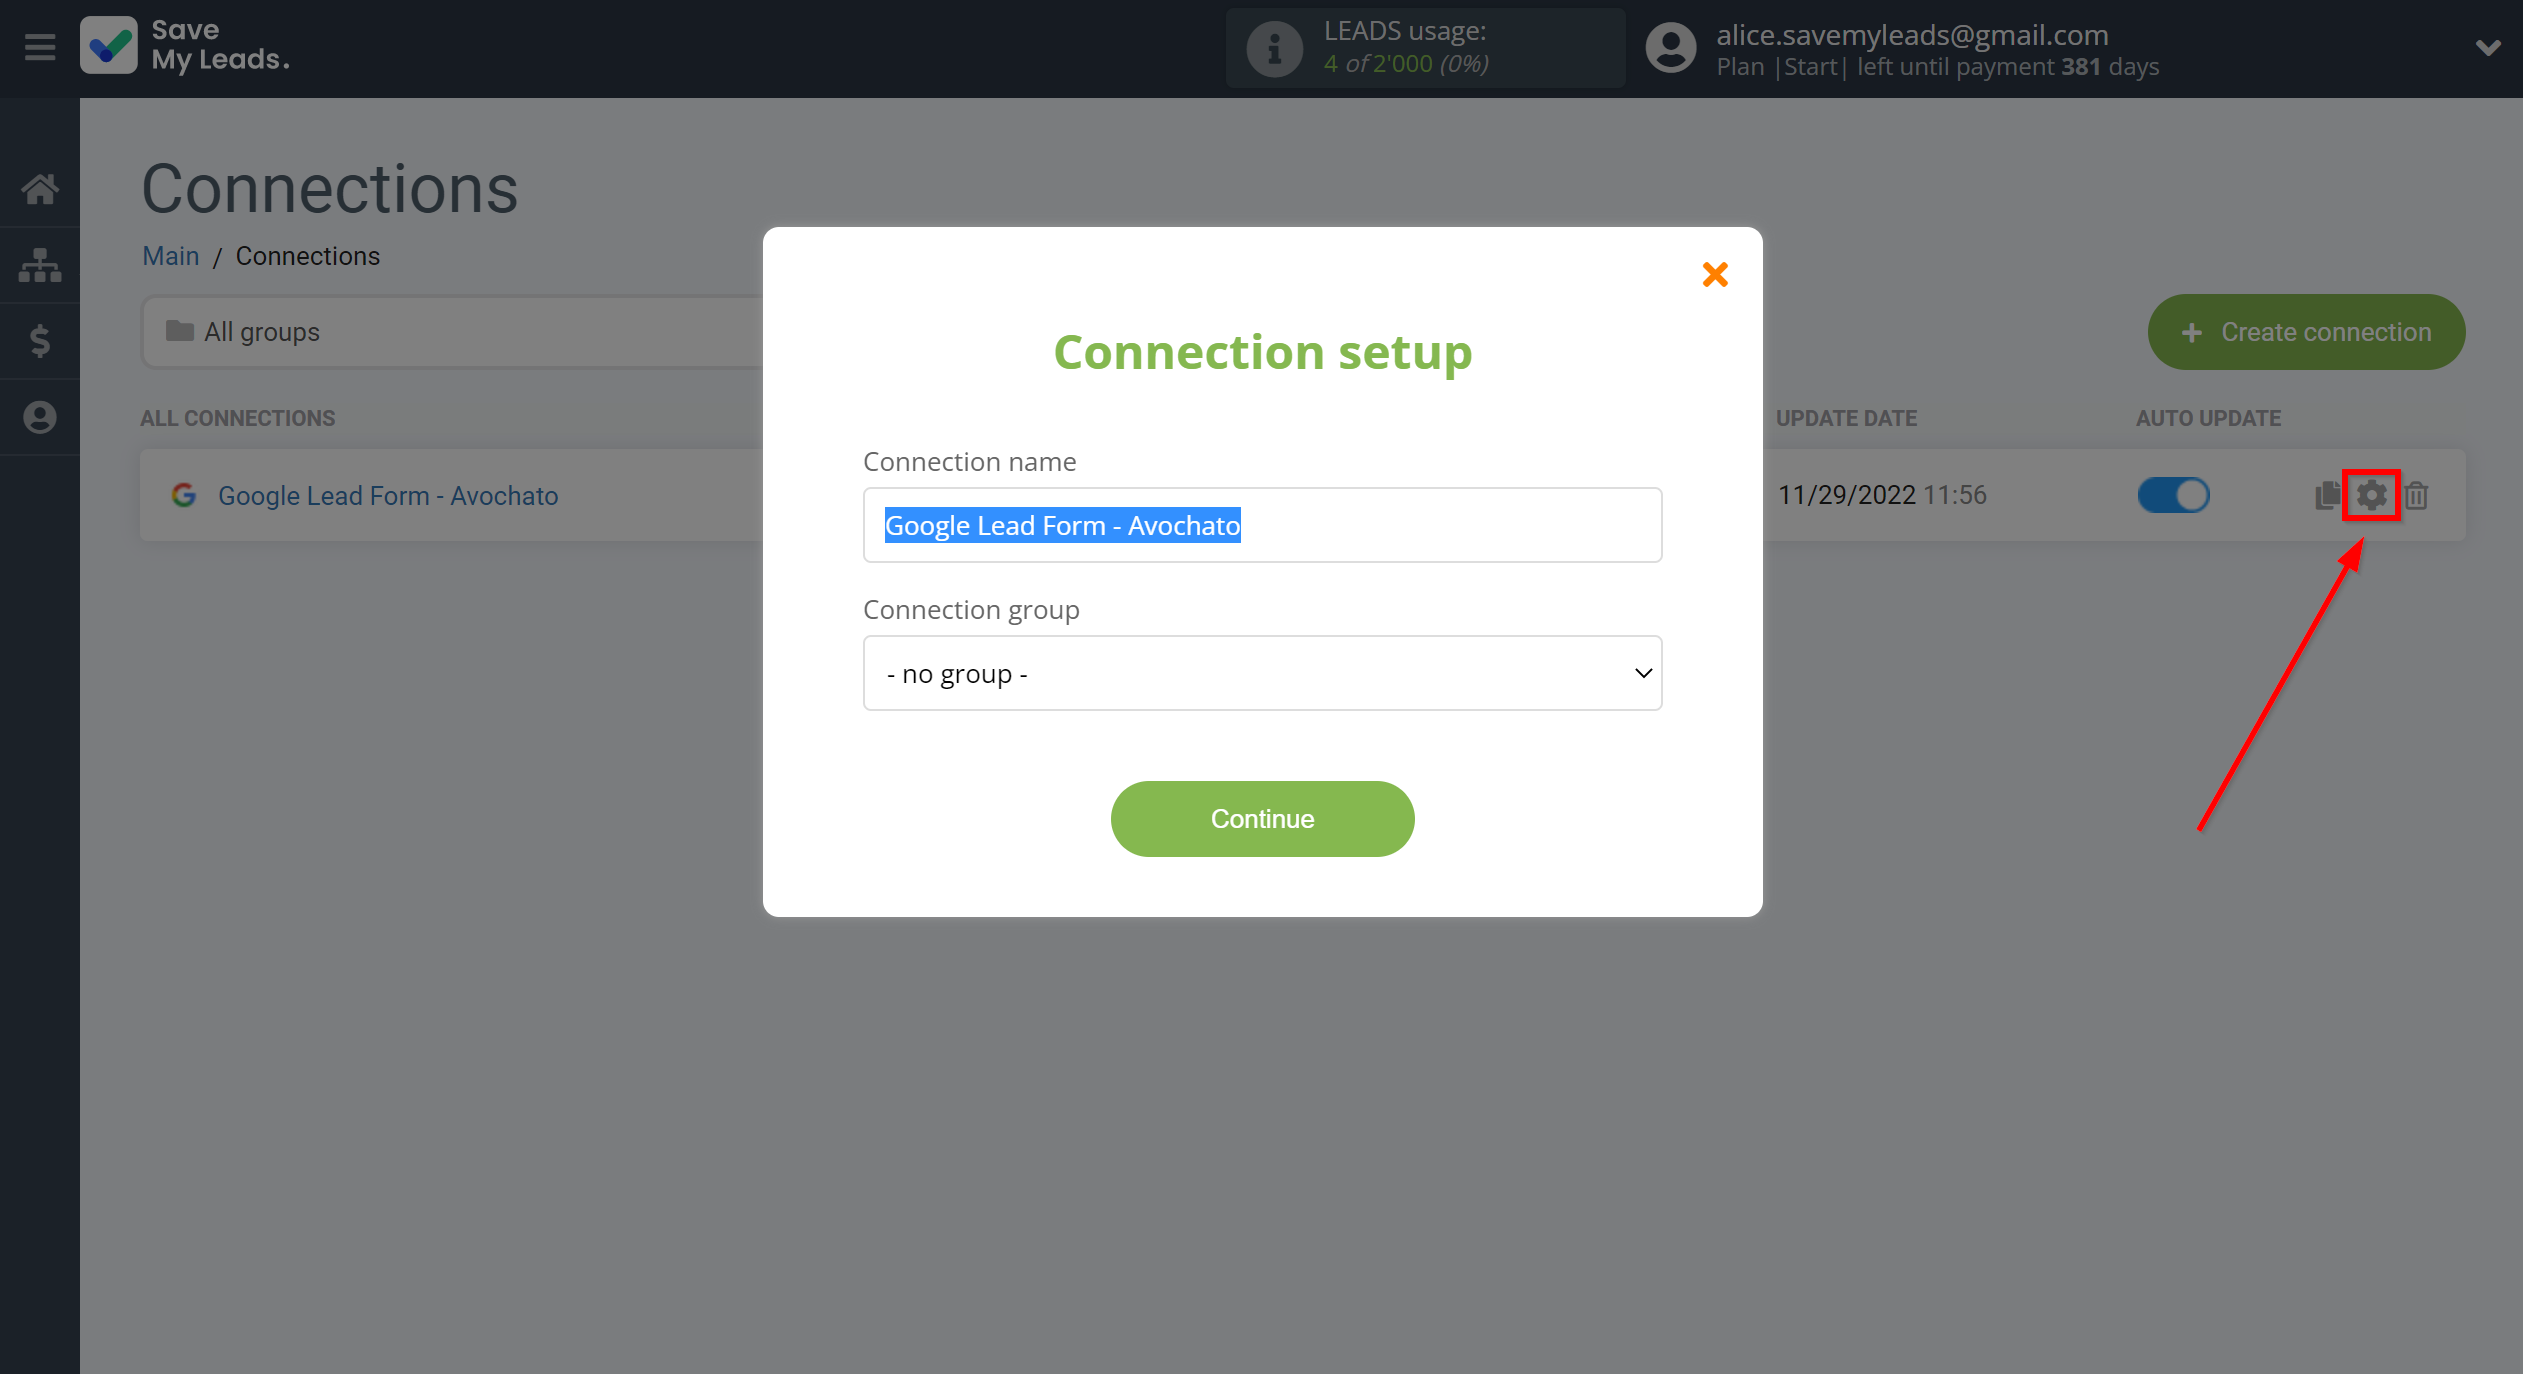 How to Connect Google Lead Form with Avochato | Name and group connection